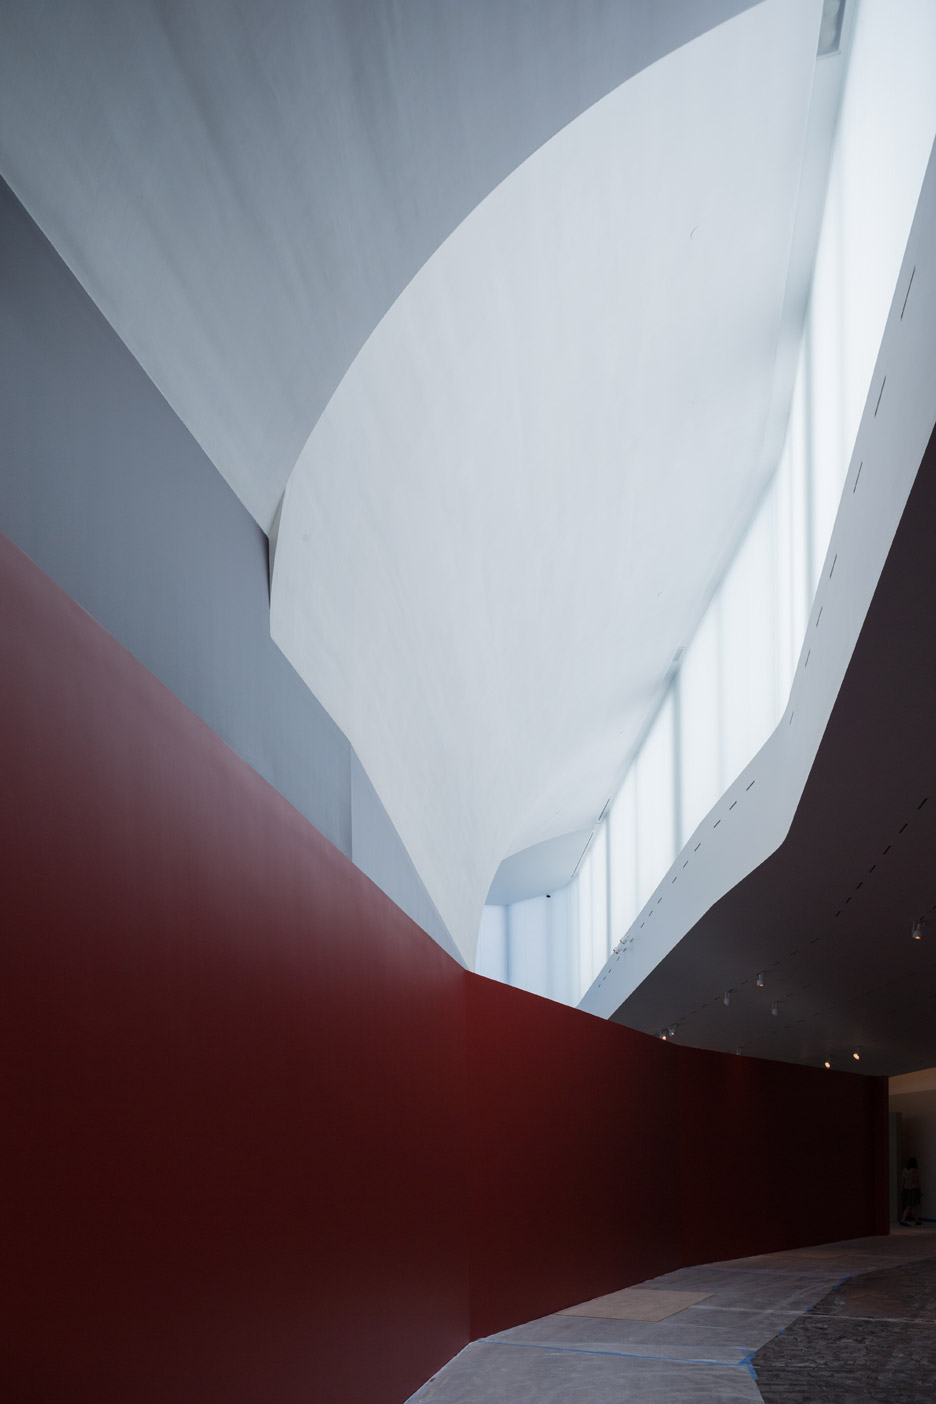 Iwan Baan photographs the Nelson Atkins Museum by Steven Holl to celebrate the new building's 10th anniversary